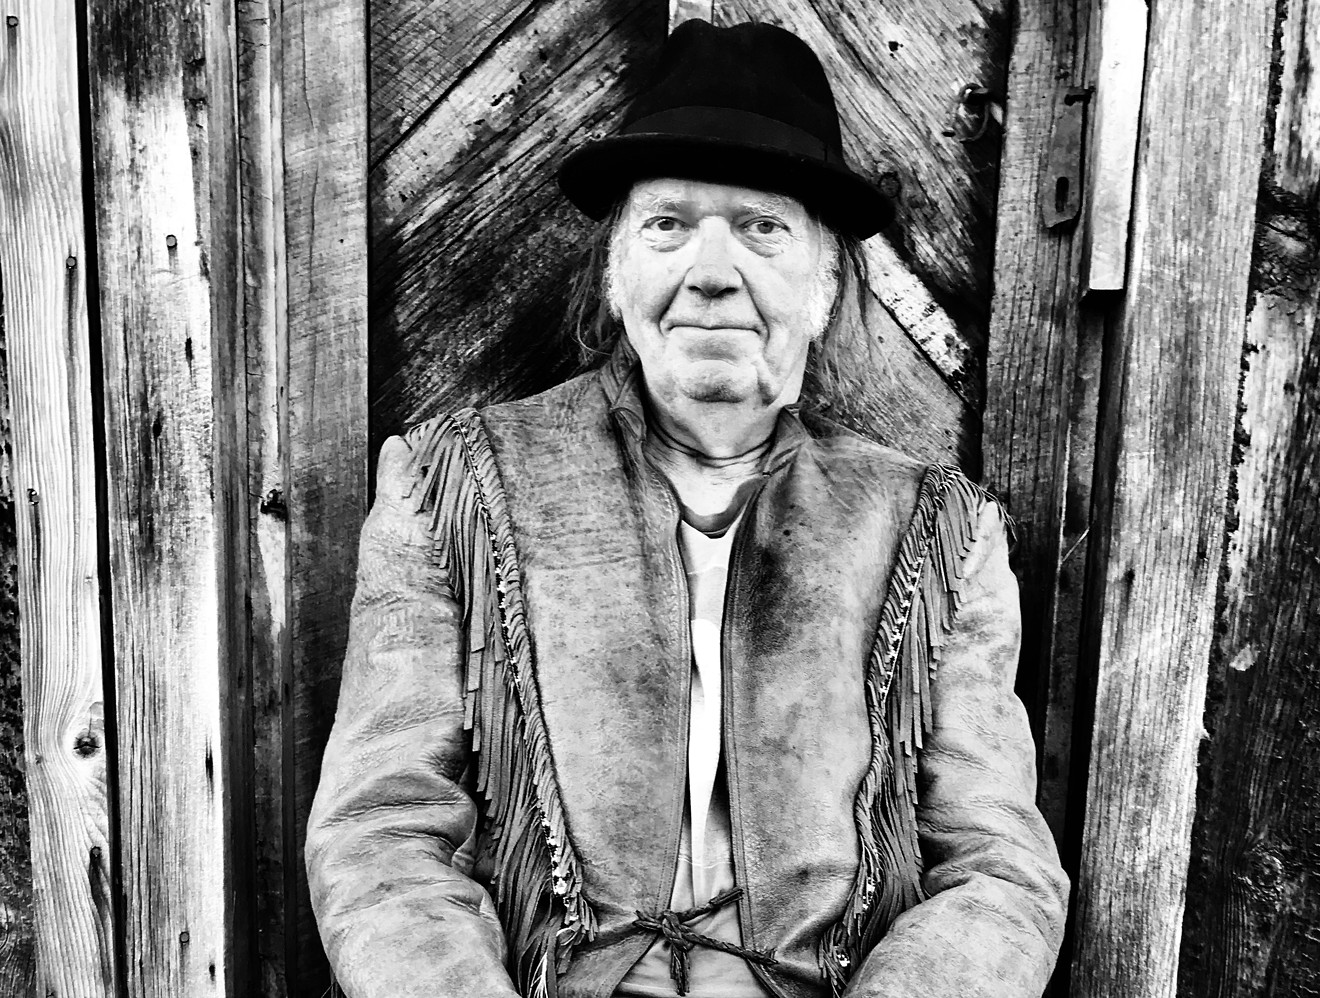 Neil Young released his long-shelved album Homegrown on June 19.